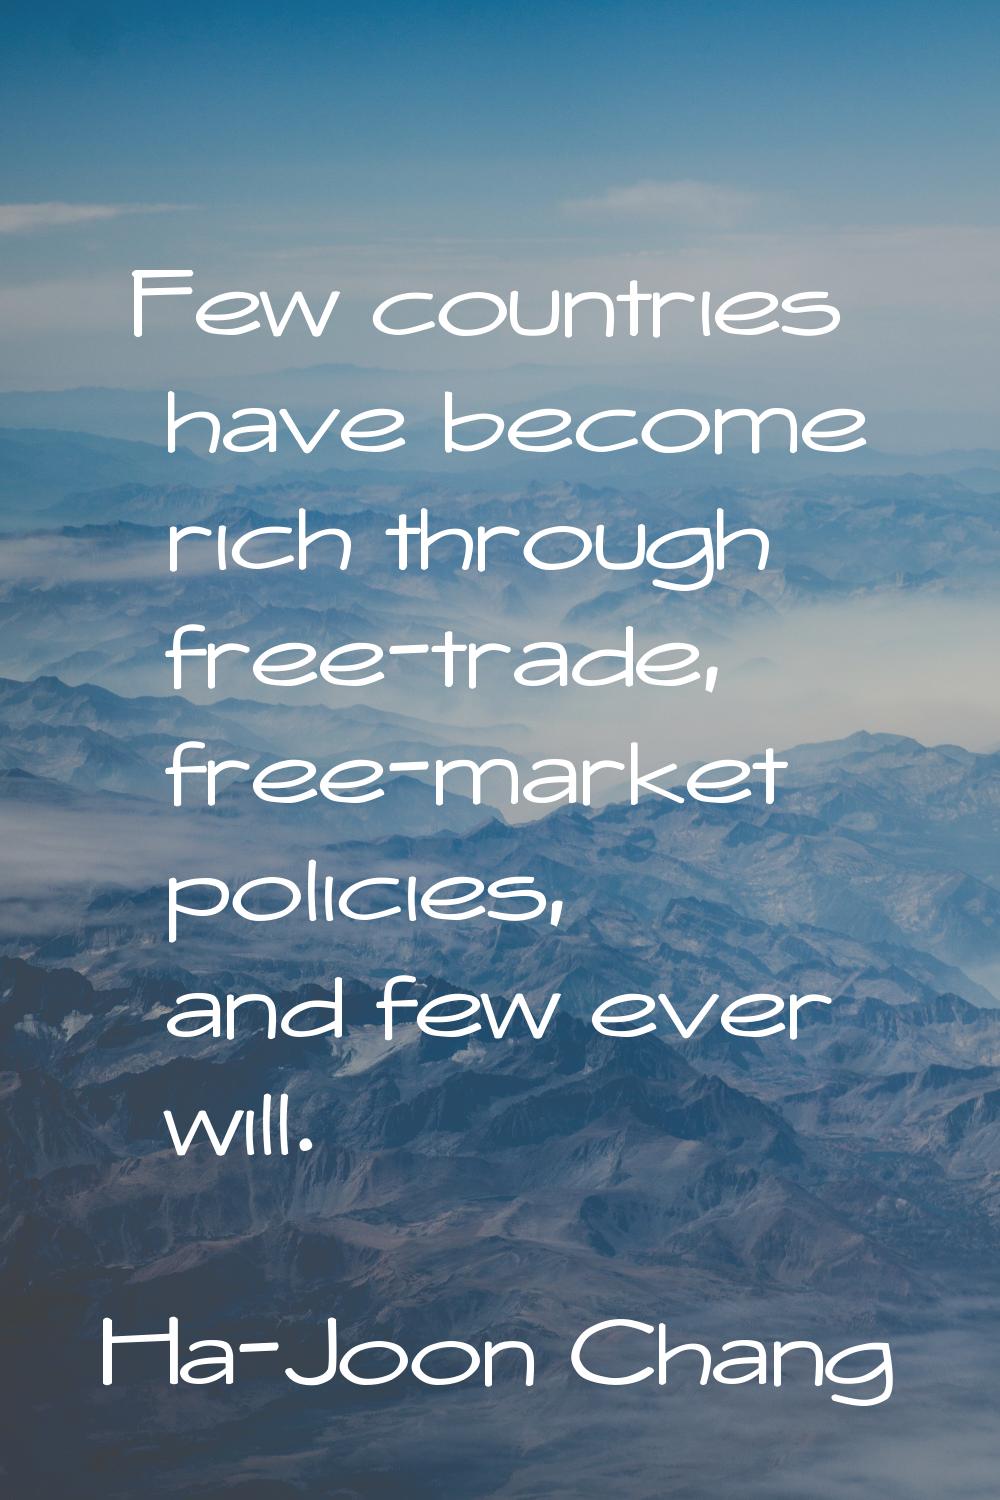 Few countries have become rich through free-trade, free-market policies, and few ever will.